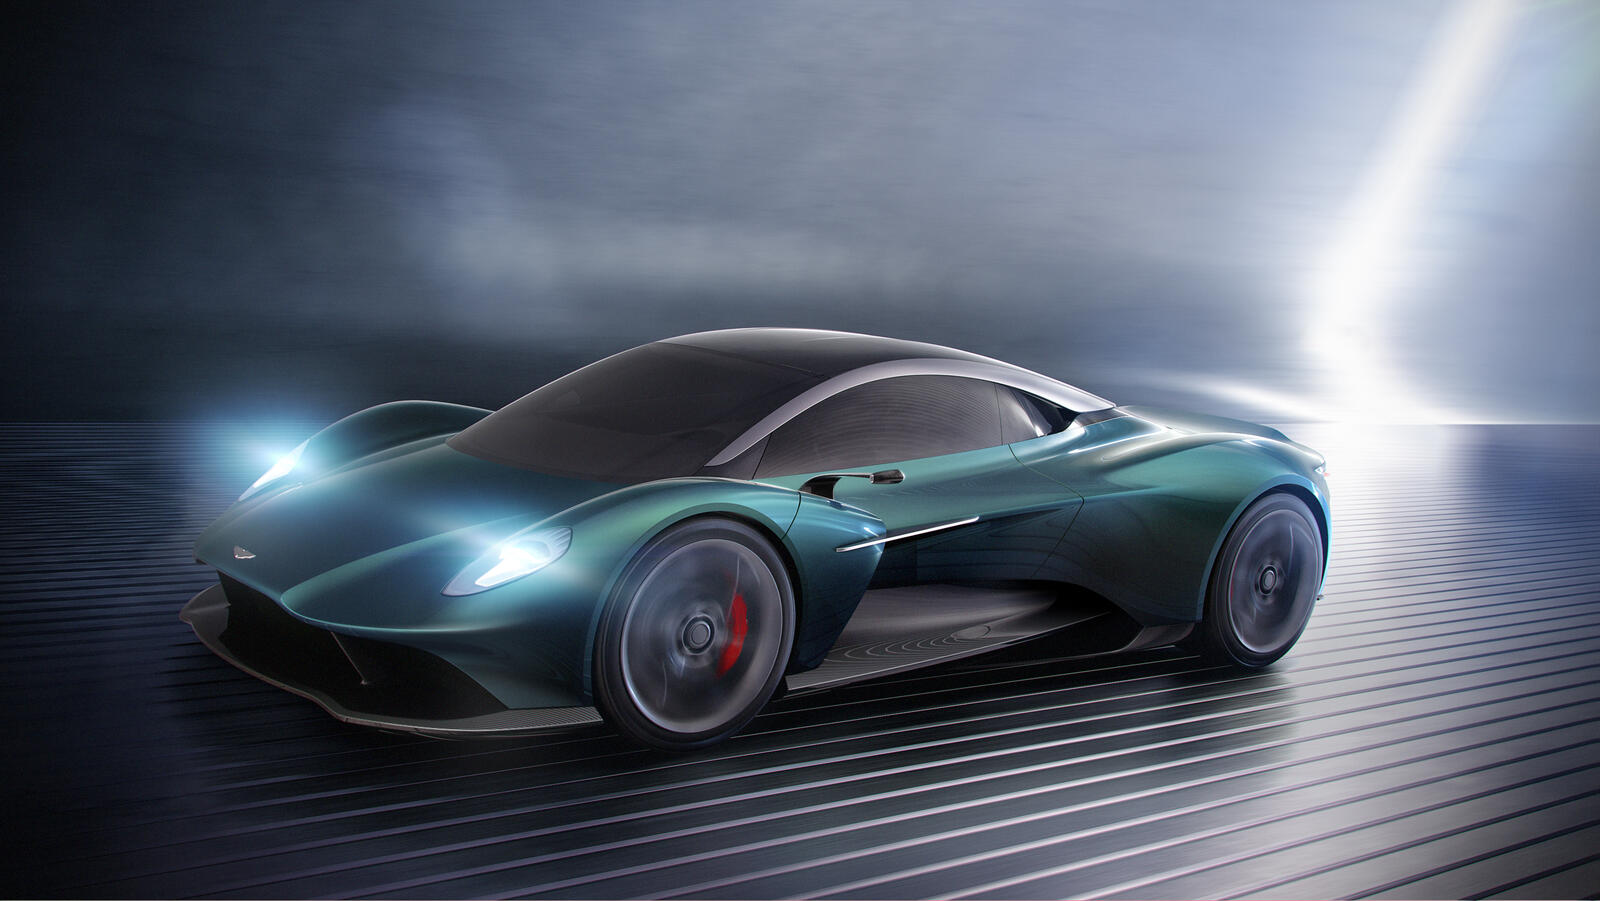 Wallpapers 2019 cars Aston Martin Vanquish Vision Concept Cars on the desktop